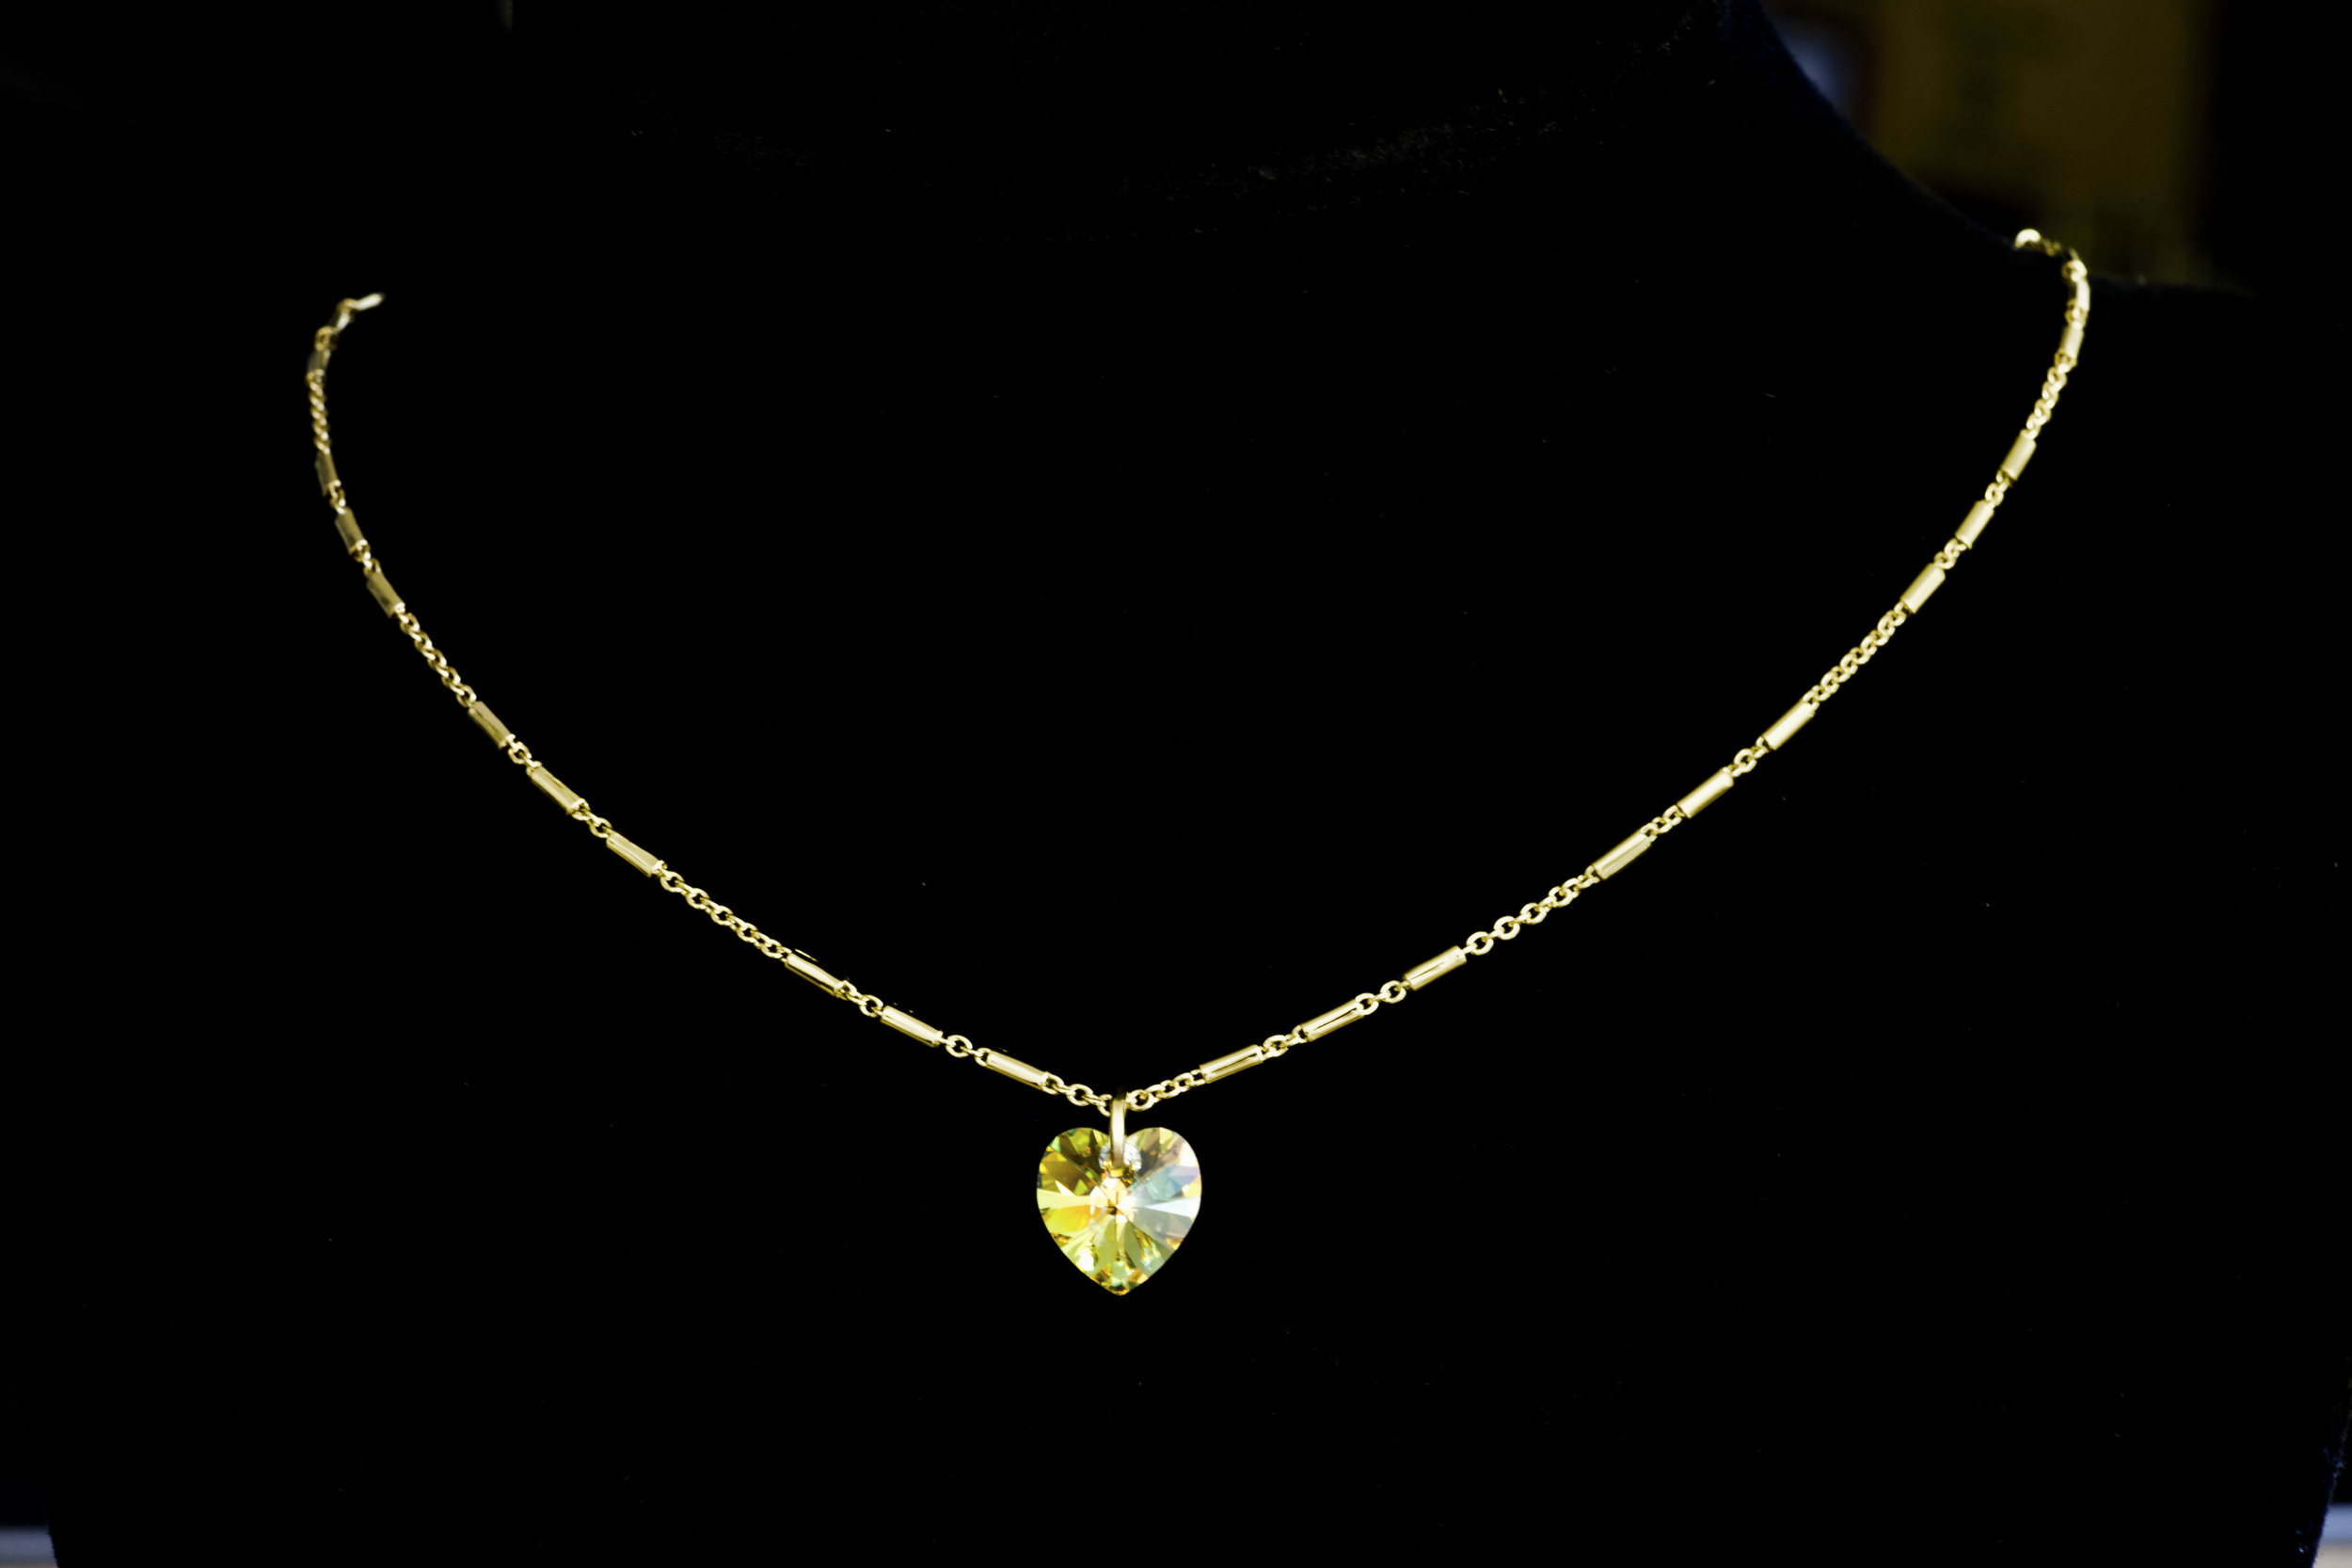 Piepen Fictief Namaak 24-Karat Gold Iridescent Swarovski Heart-Shaped Pendant With Fancy Periodic  Bar Chain (24 Carat Overlay) - Gemtera | Gemmy - Clear & Colorful® -  Lifestyle and Home Products.